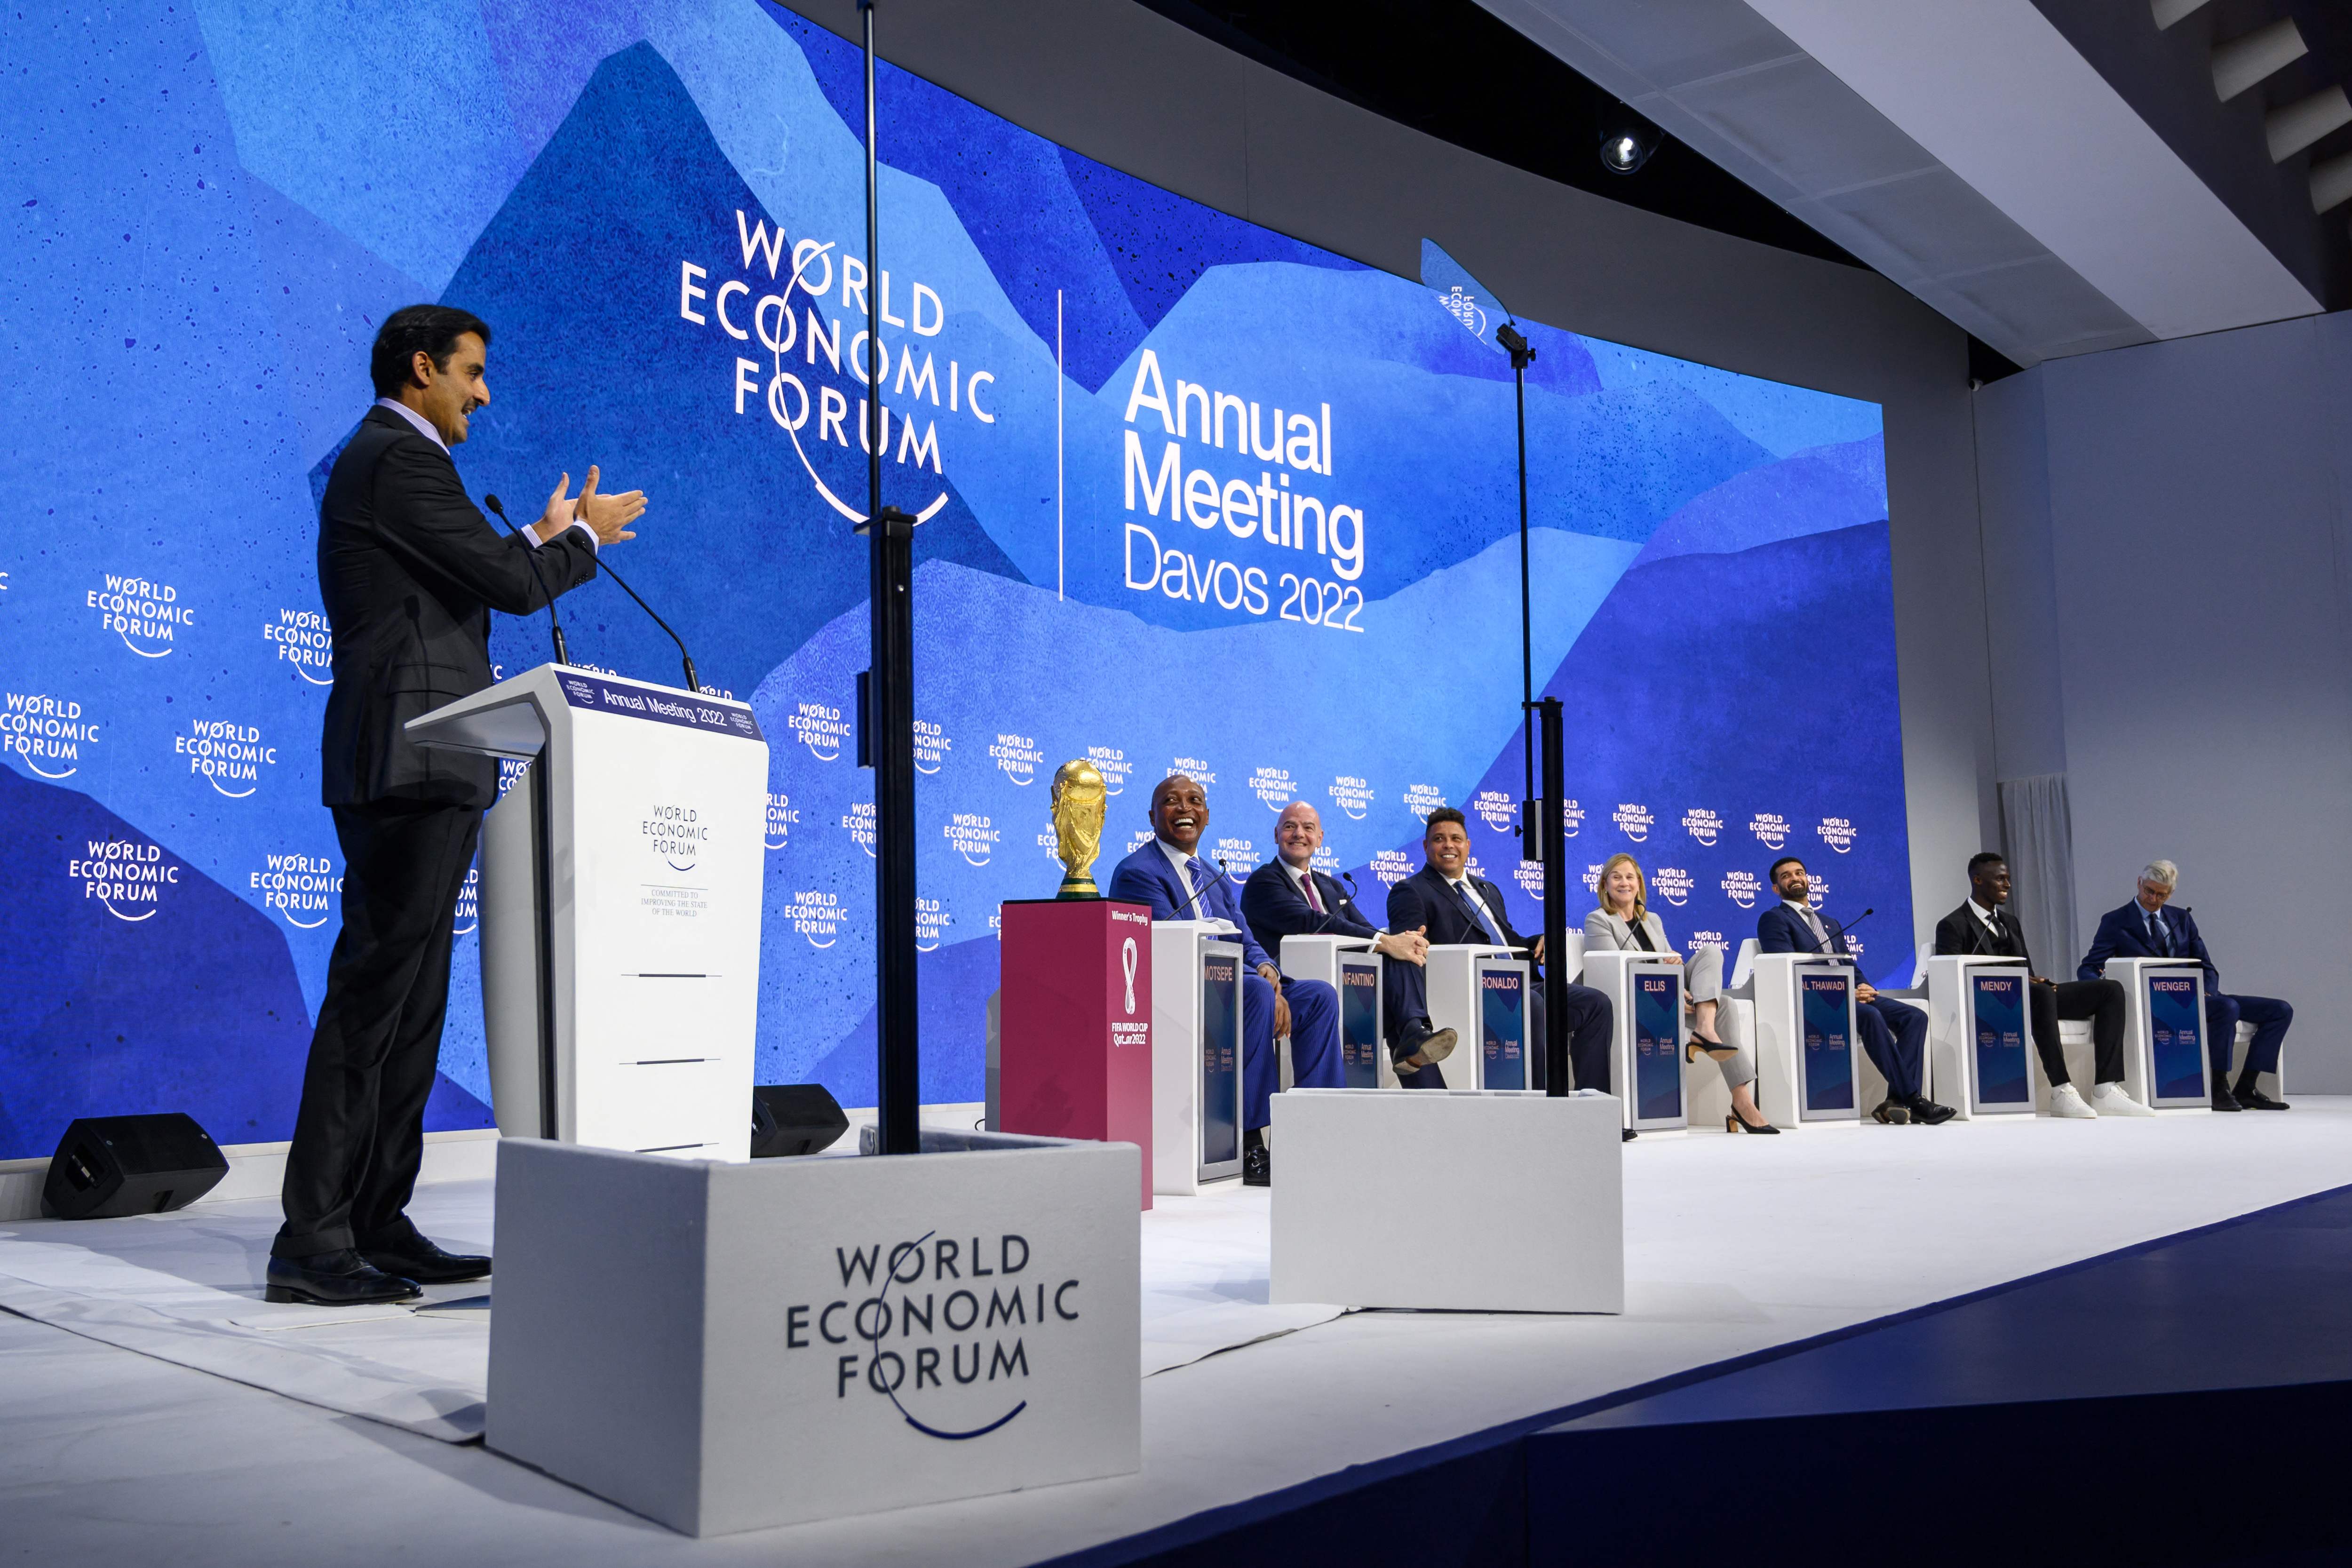 It’s growing prominence has, unsurprisingly, made Davos a prime target of conspiracy theories